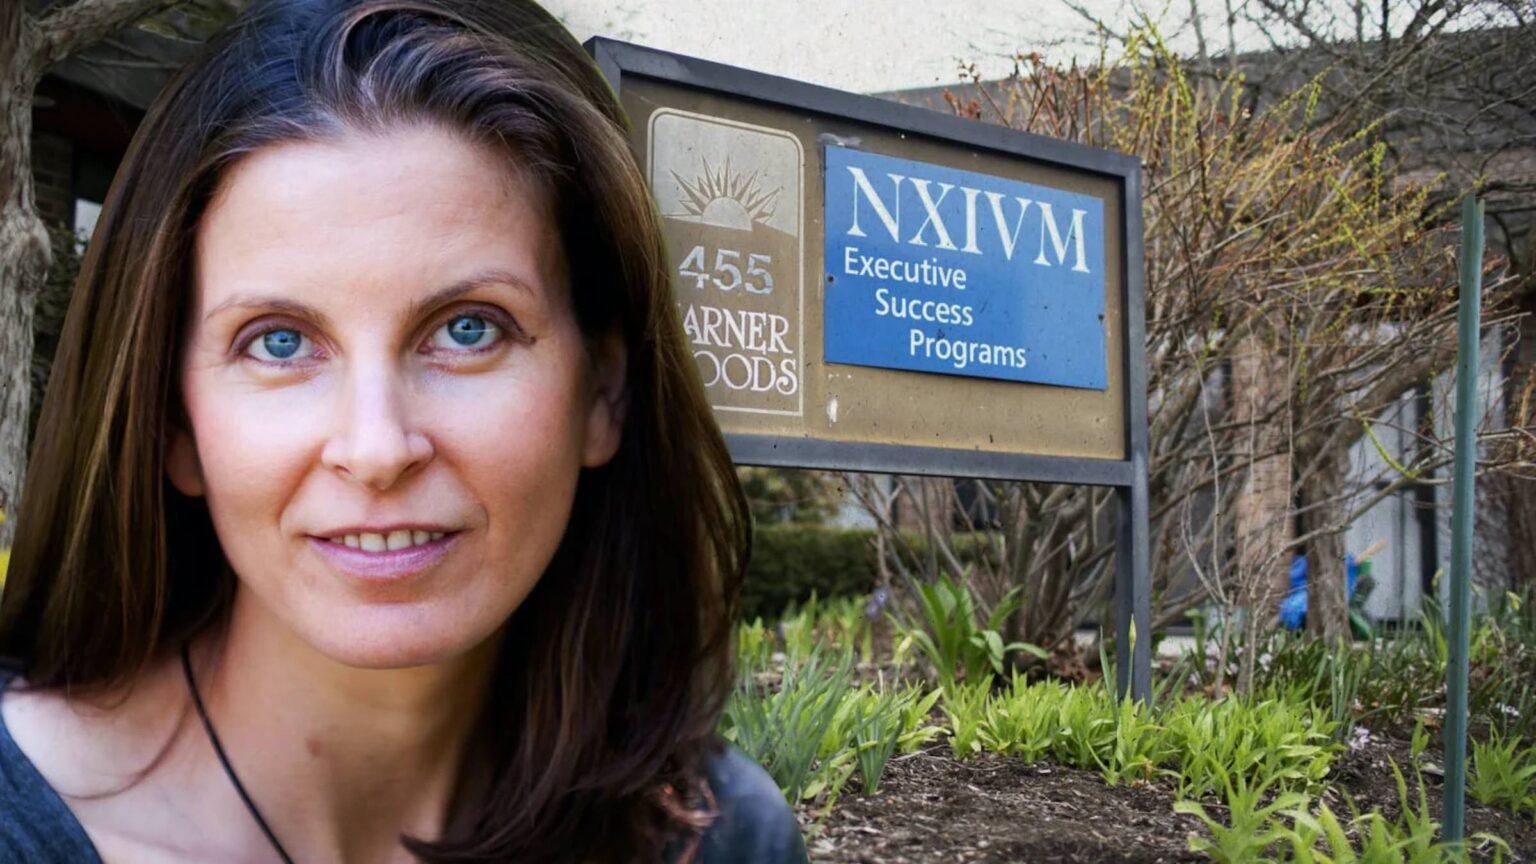 Seagram's heiress Clare Bronfman almost single-handedly funded all NXIVM's cult activities. Was she a victim too?